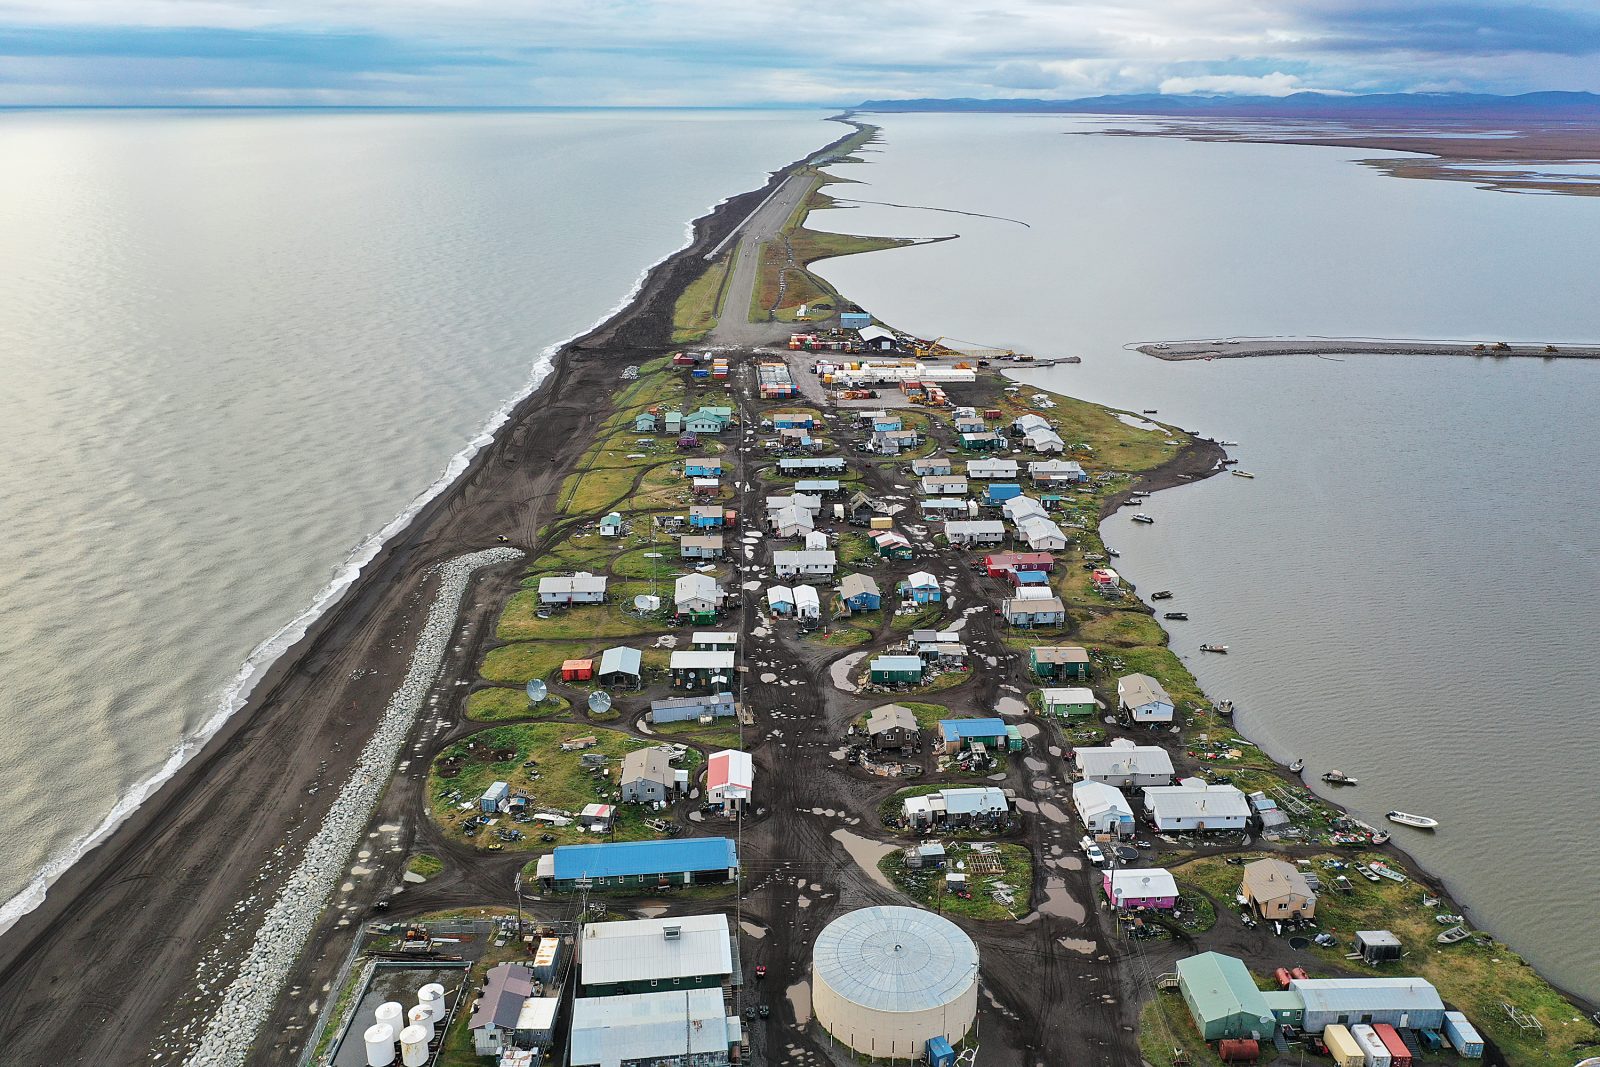 Aerial view of the village of Kivalina on a spit of land in the Chukchi Sea.